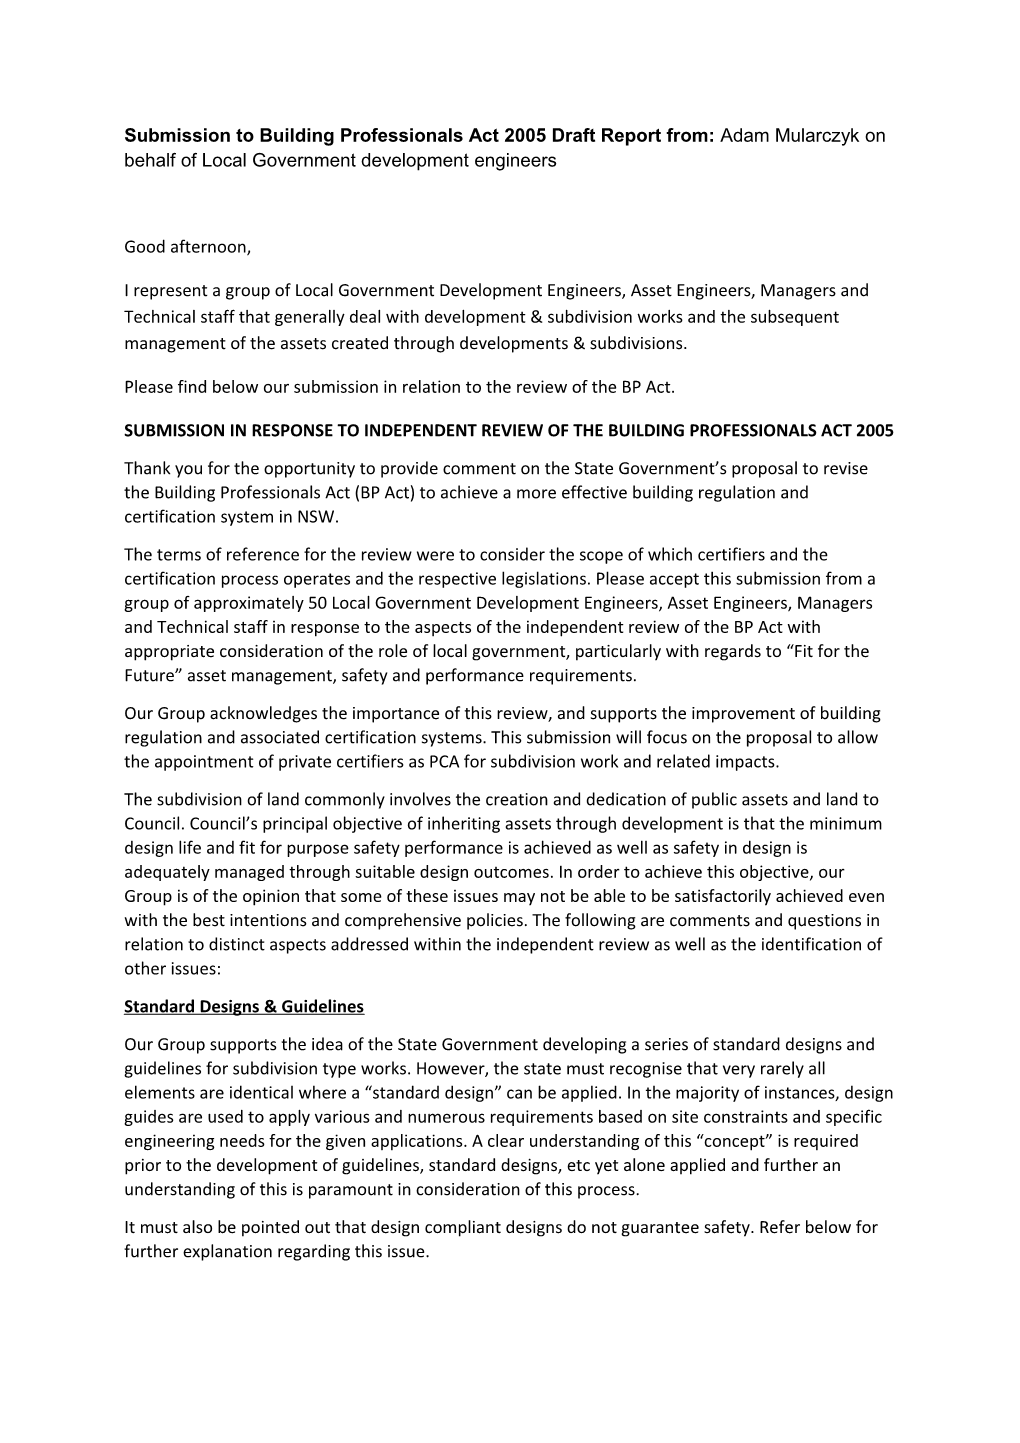 Submission in Response to Independent Review of the Building Professionals Act 2005